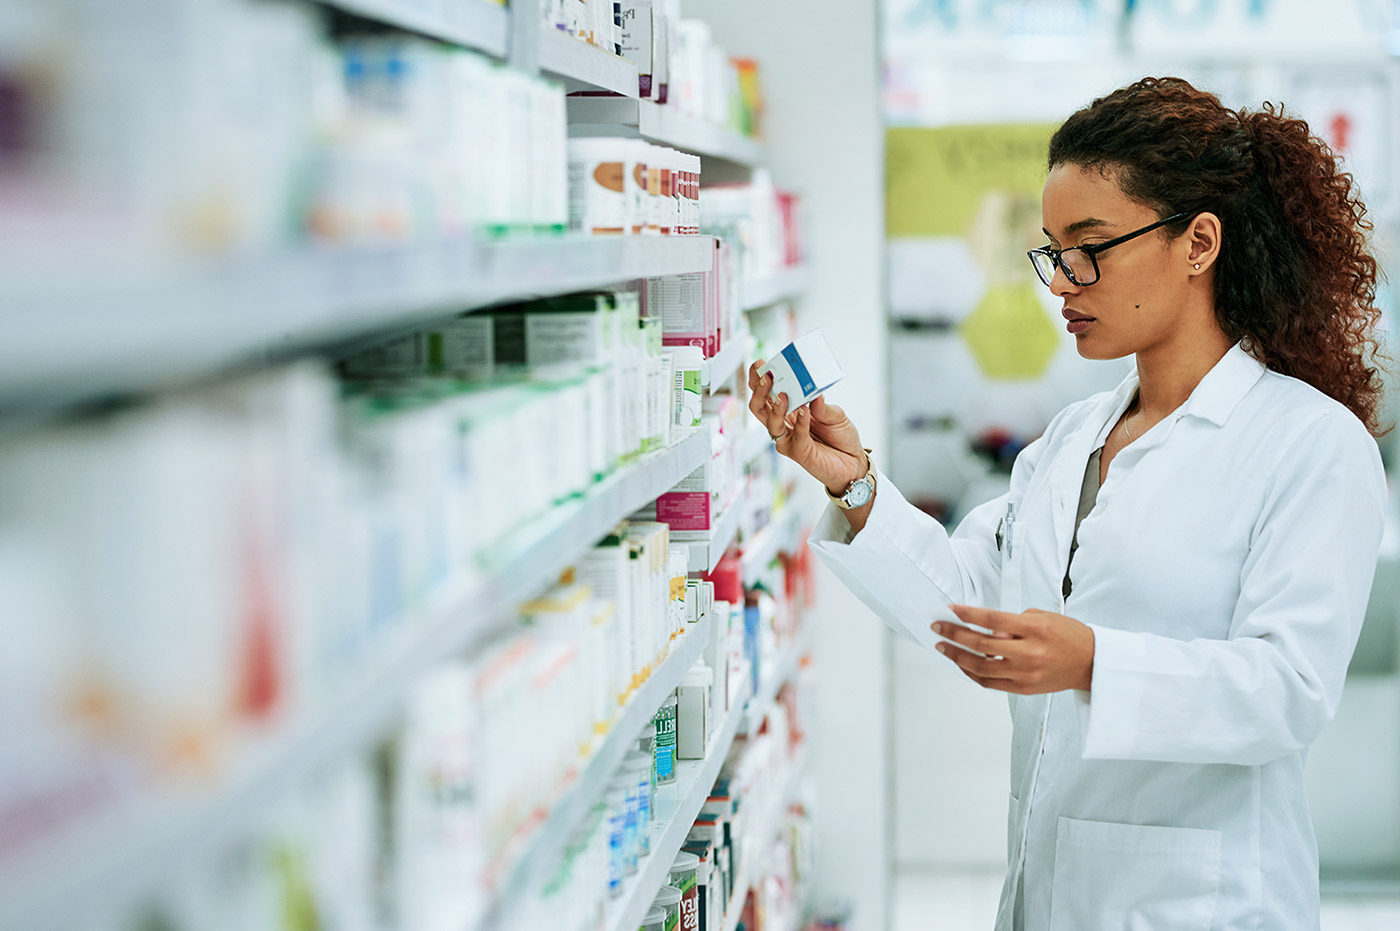 A healthcare worker looking at a box of medicine in a pharmacy.